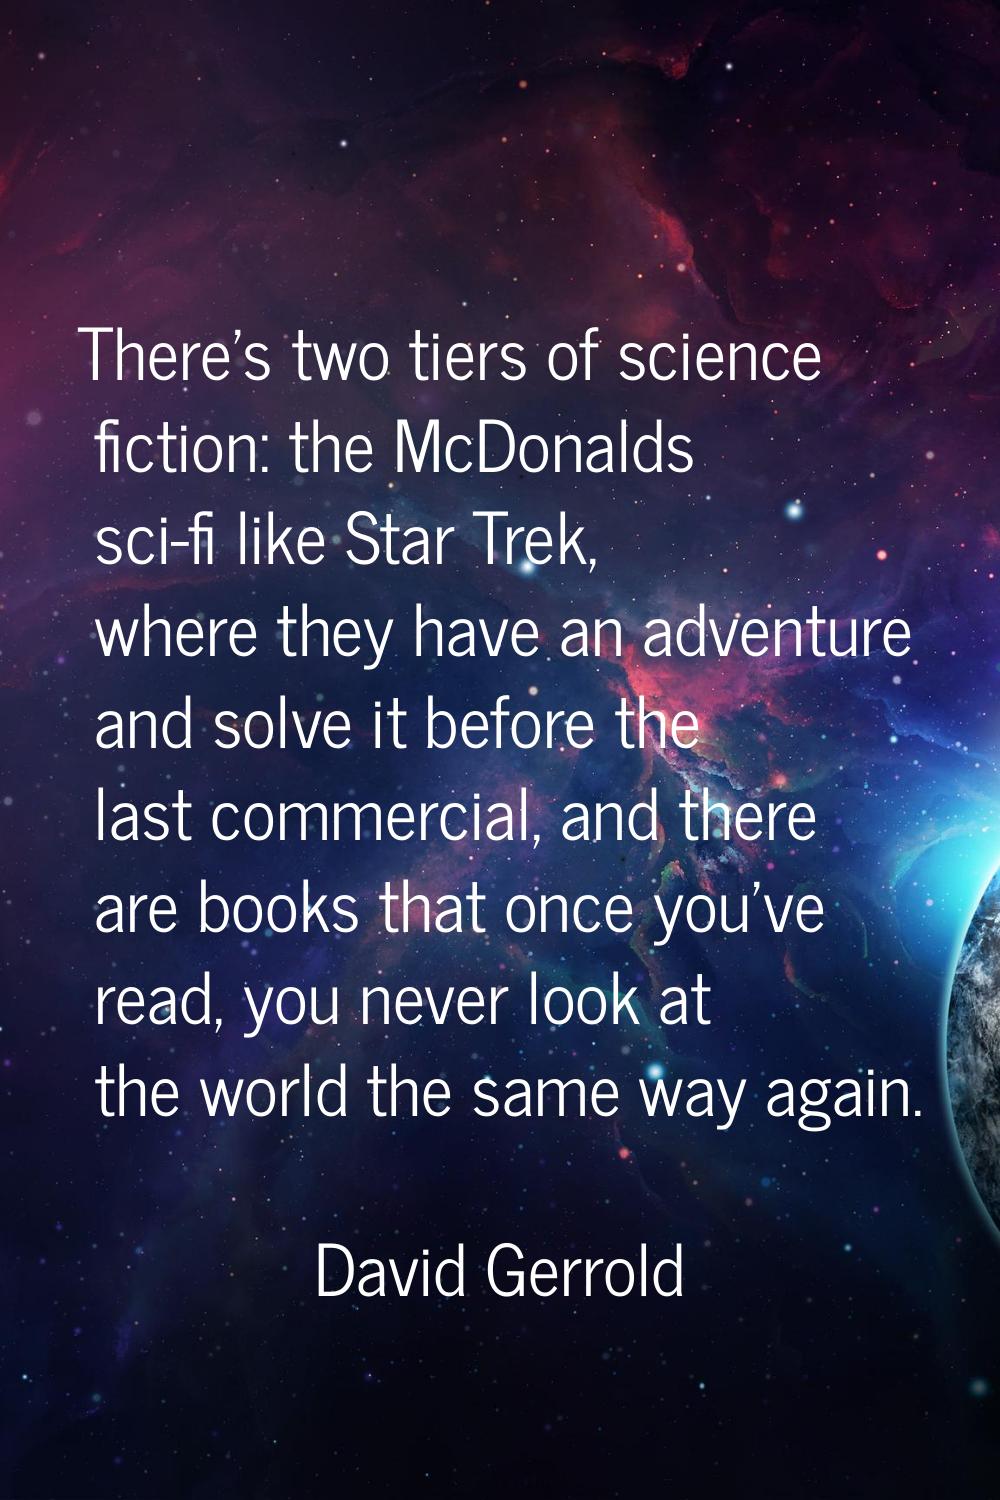 There's two tiers of science fiction: the McDonalds sci-fi like Star Trek, where they have an adven